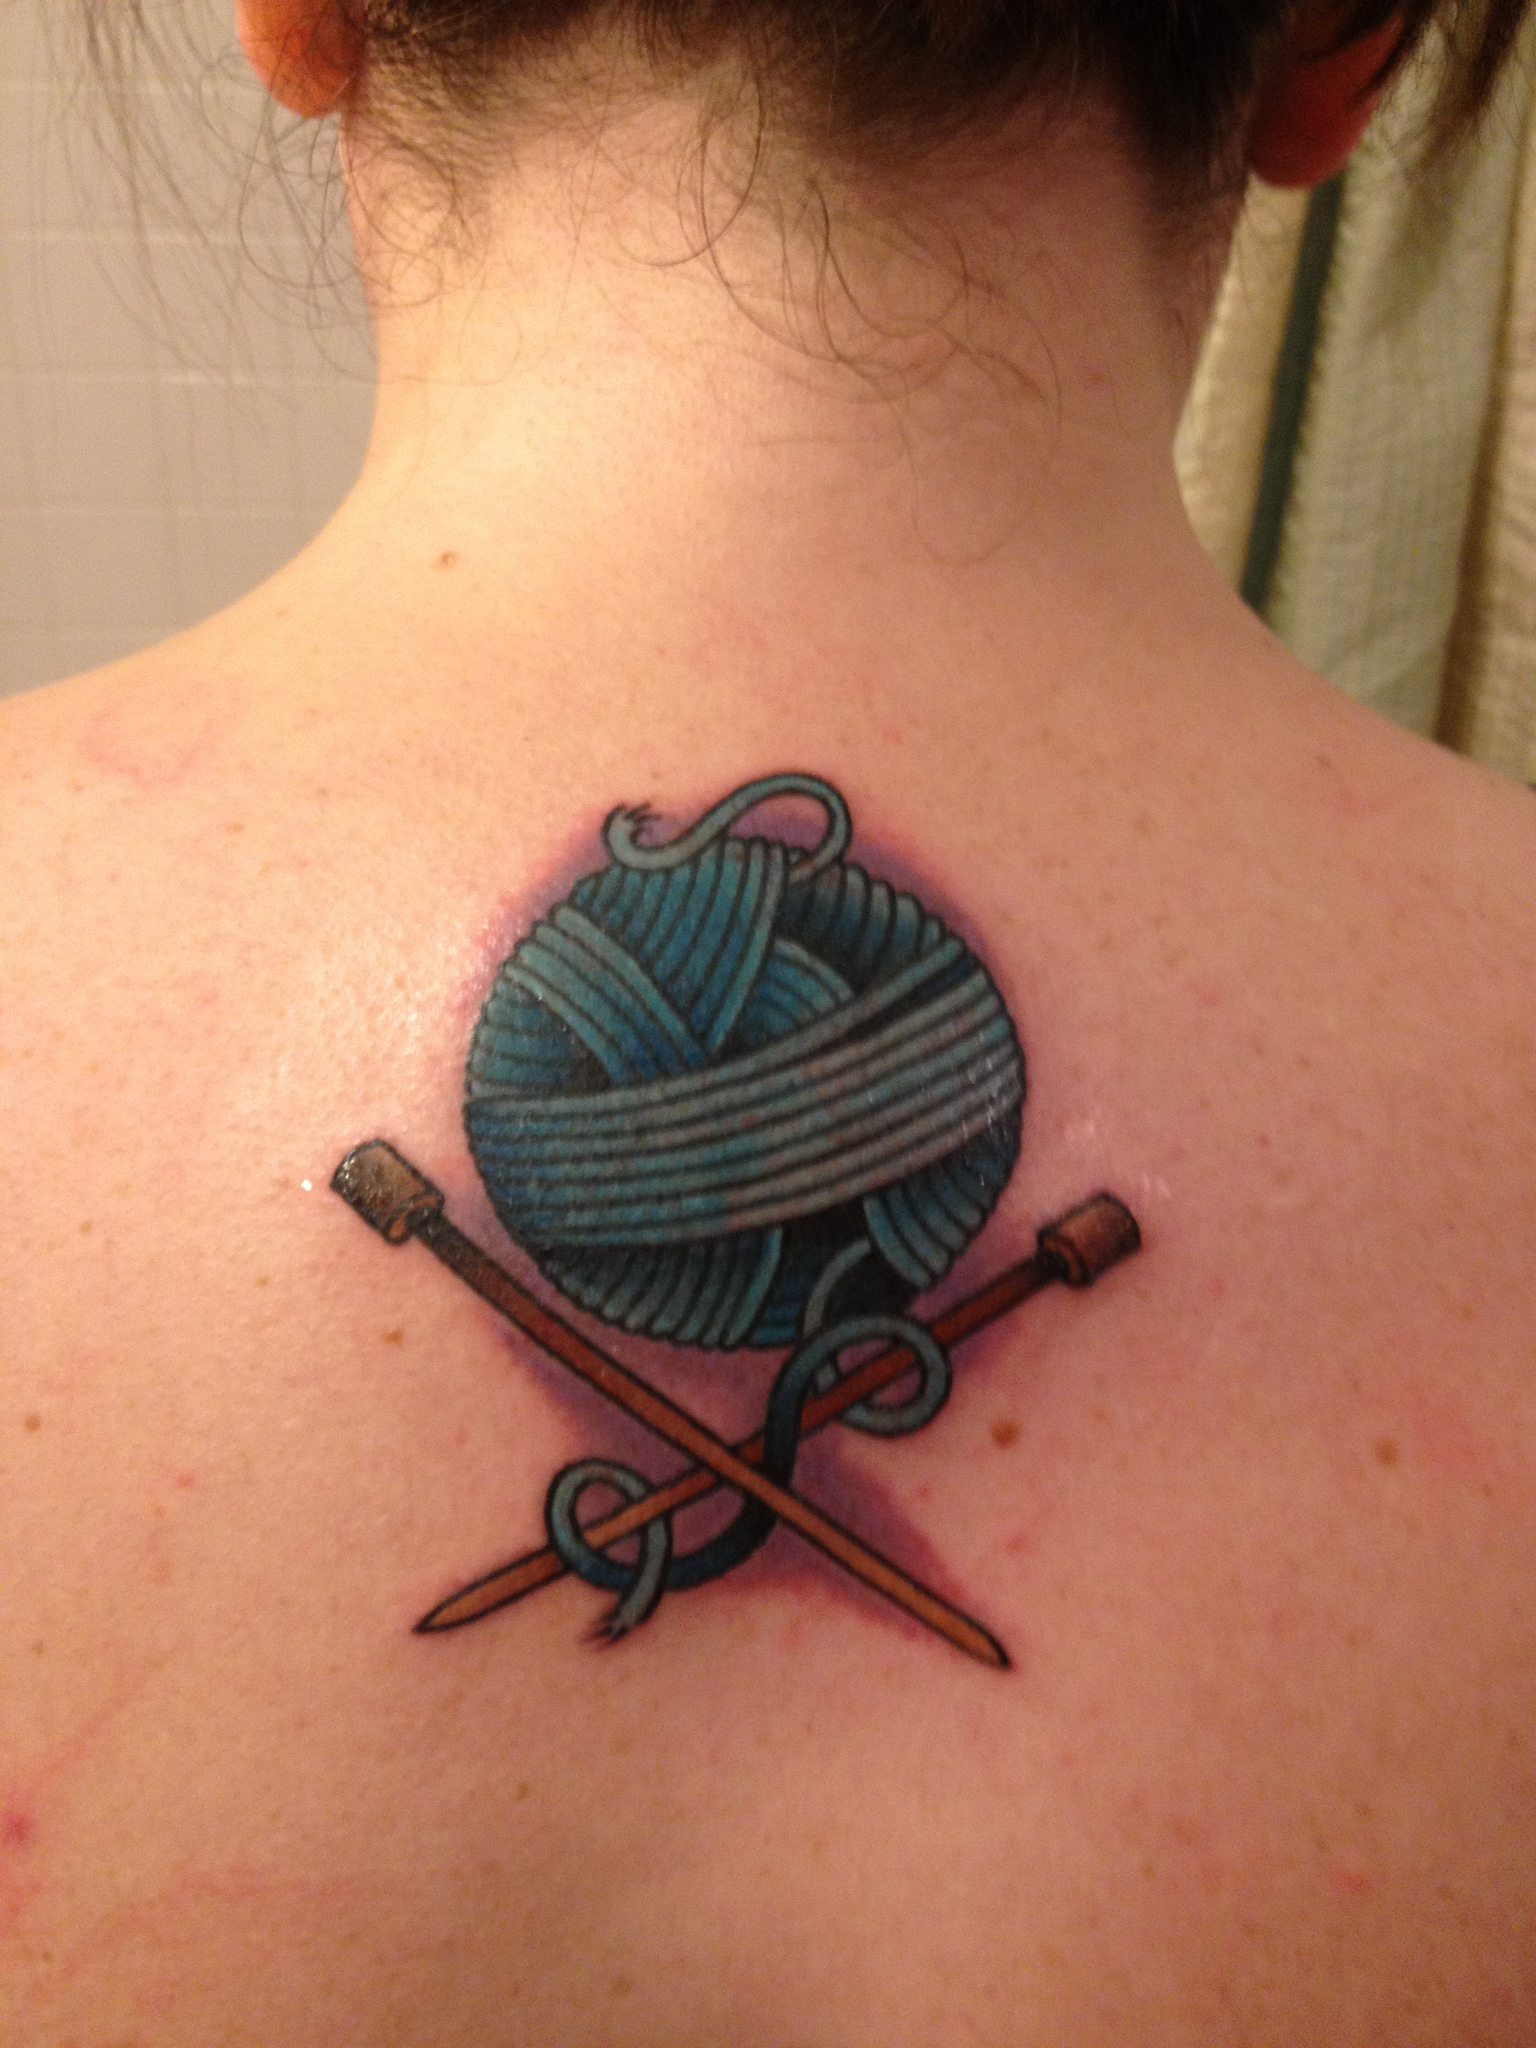 Knitting tattoo with needles and a ball of yarn